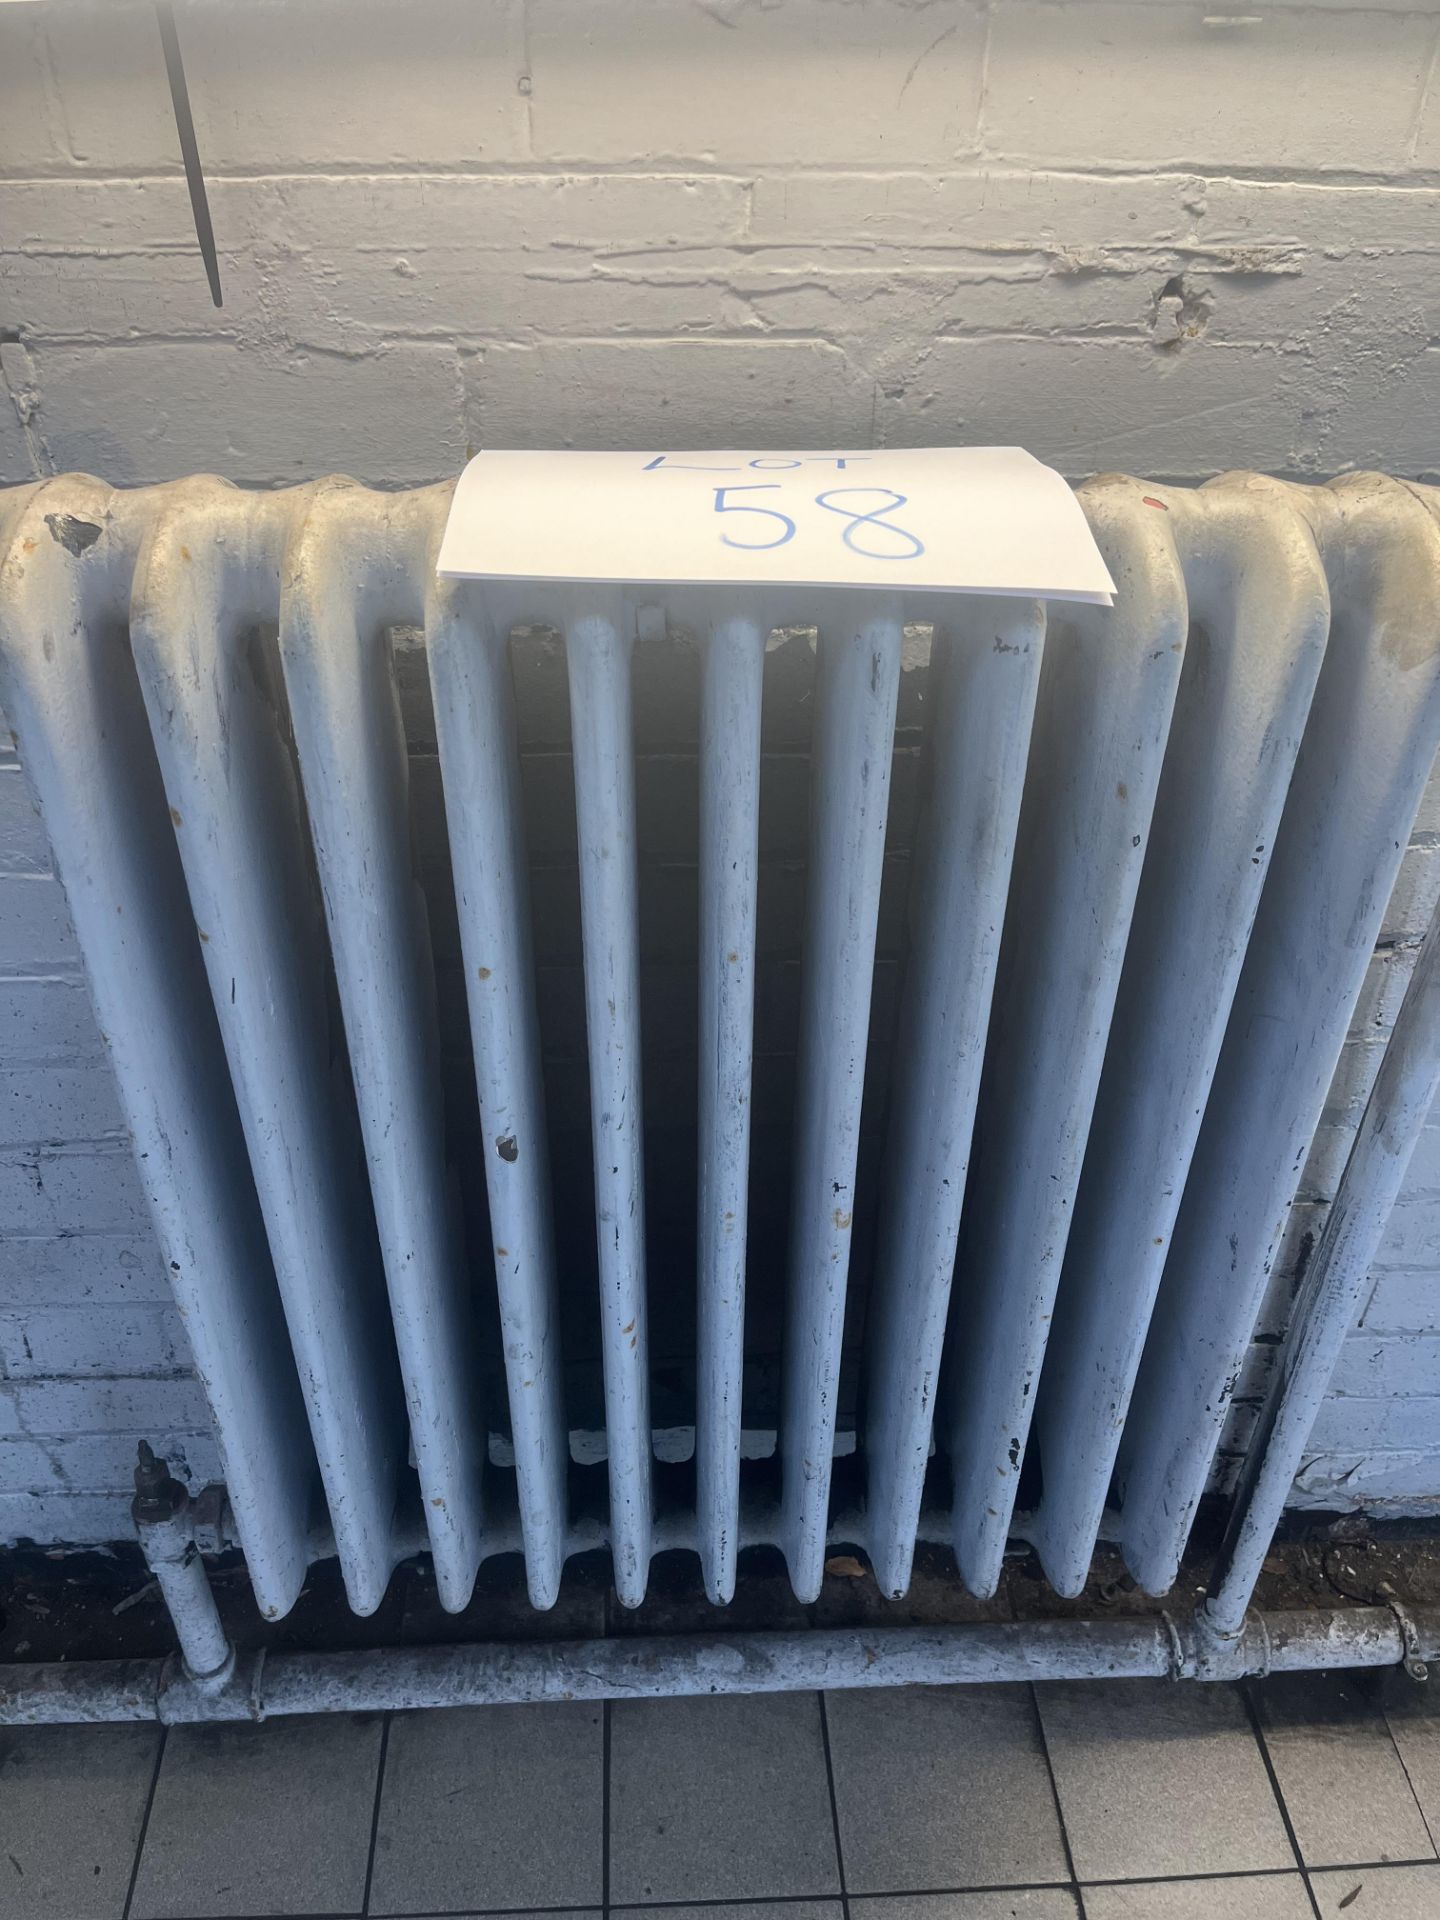 Architectural salvage: medium industrial radiator (Please note the successful bidder will be